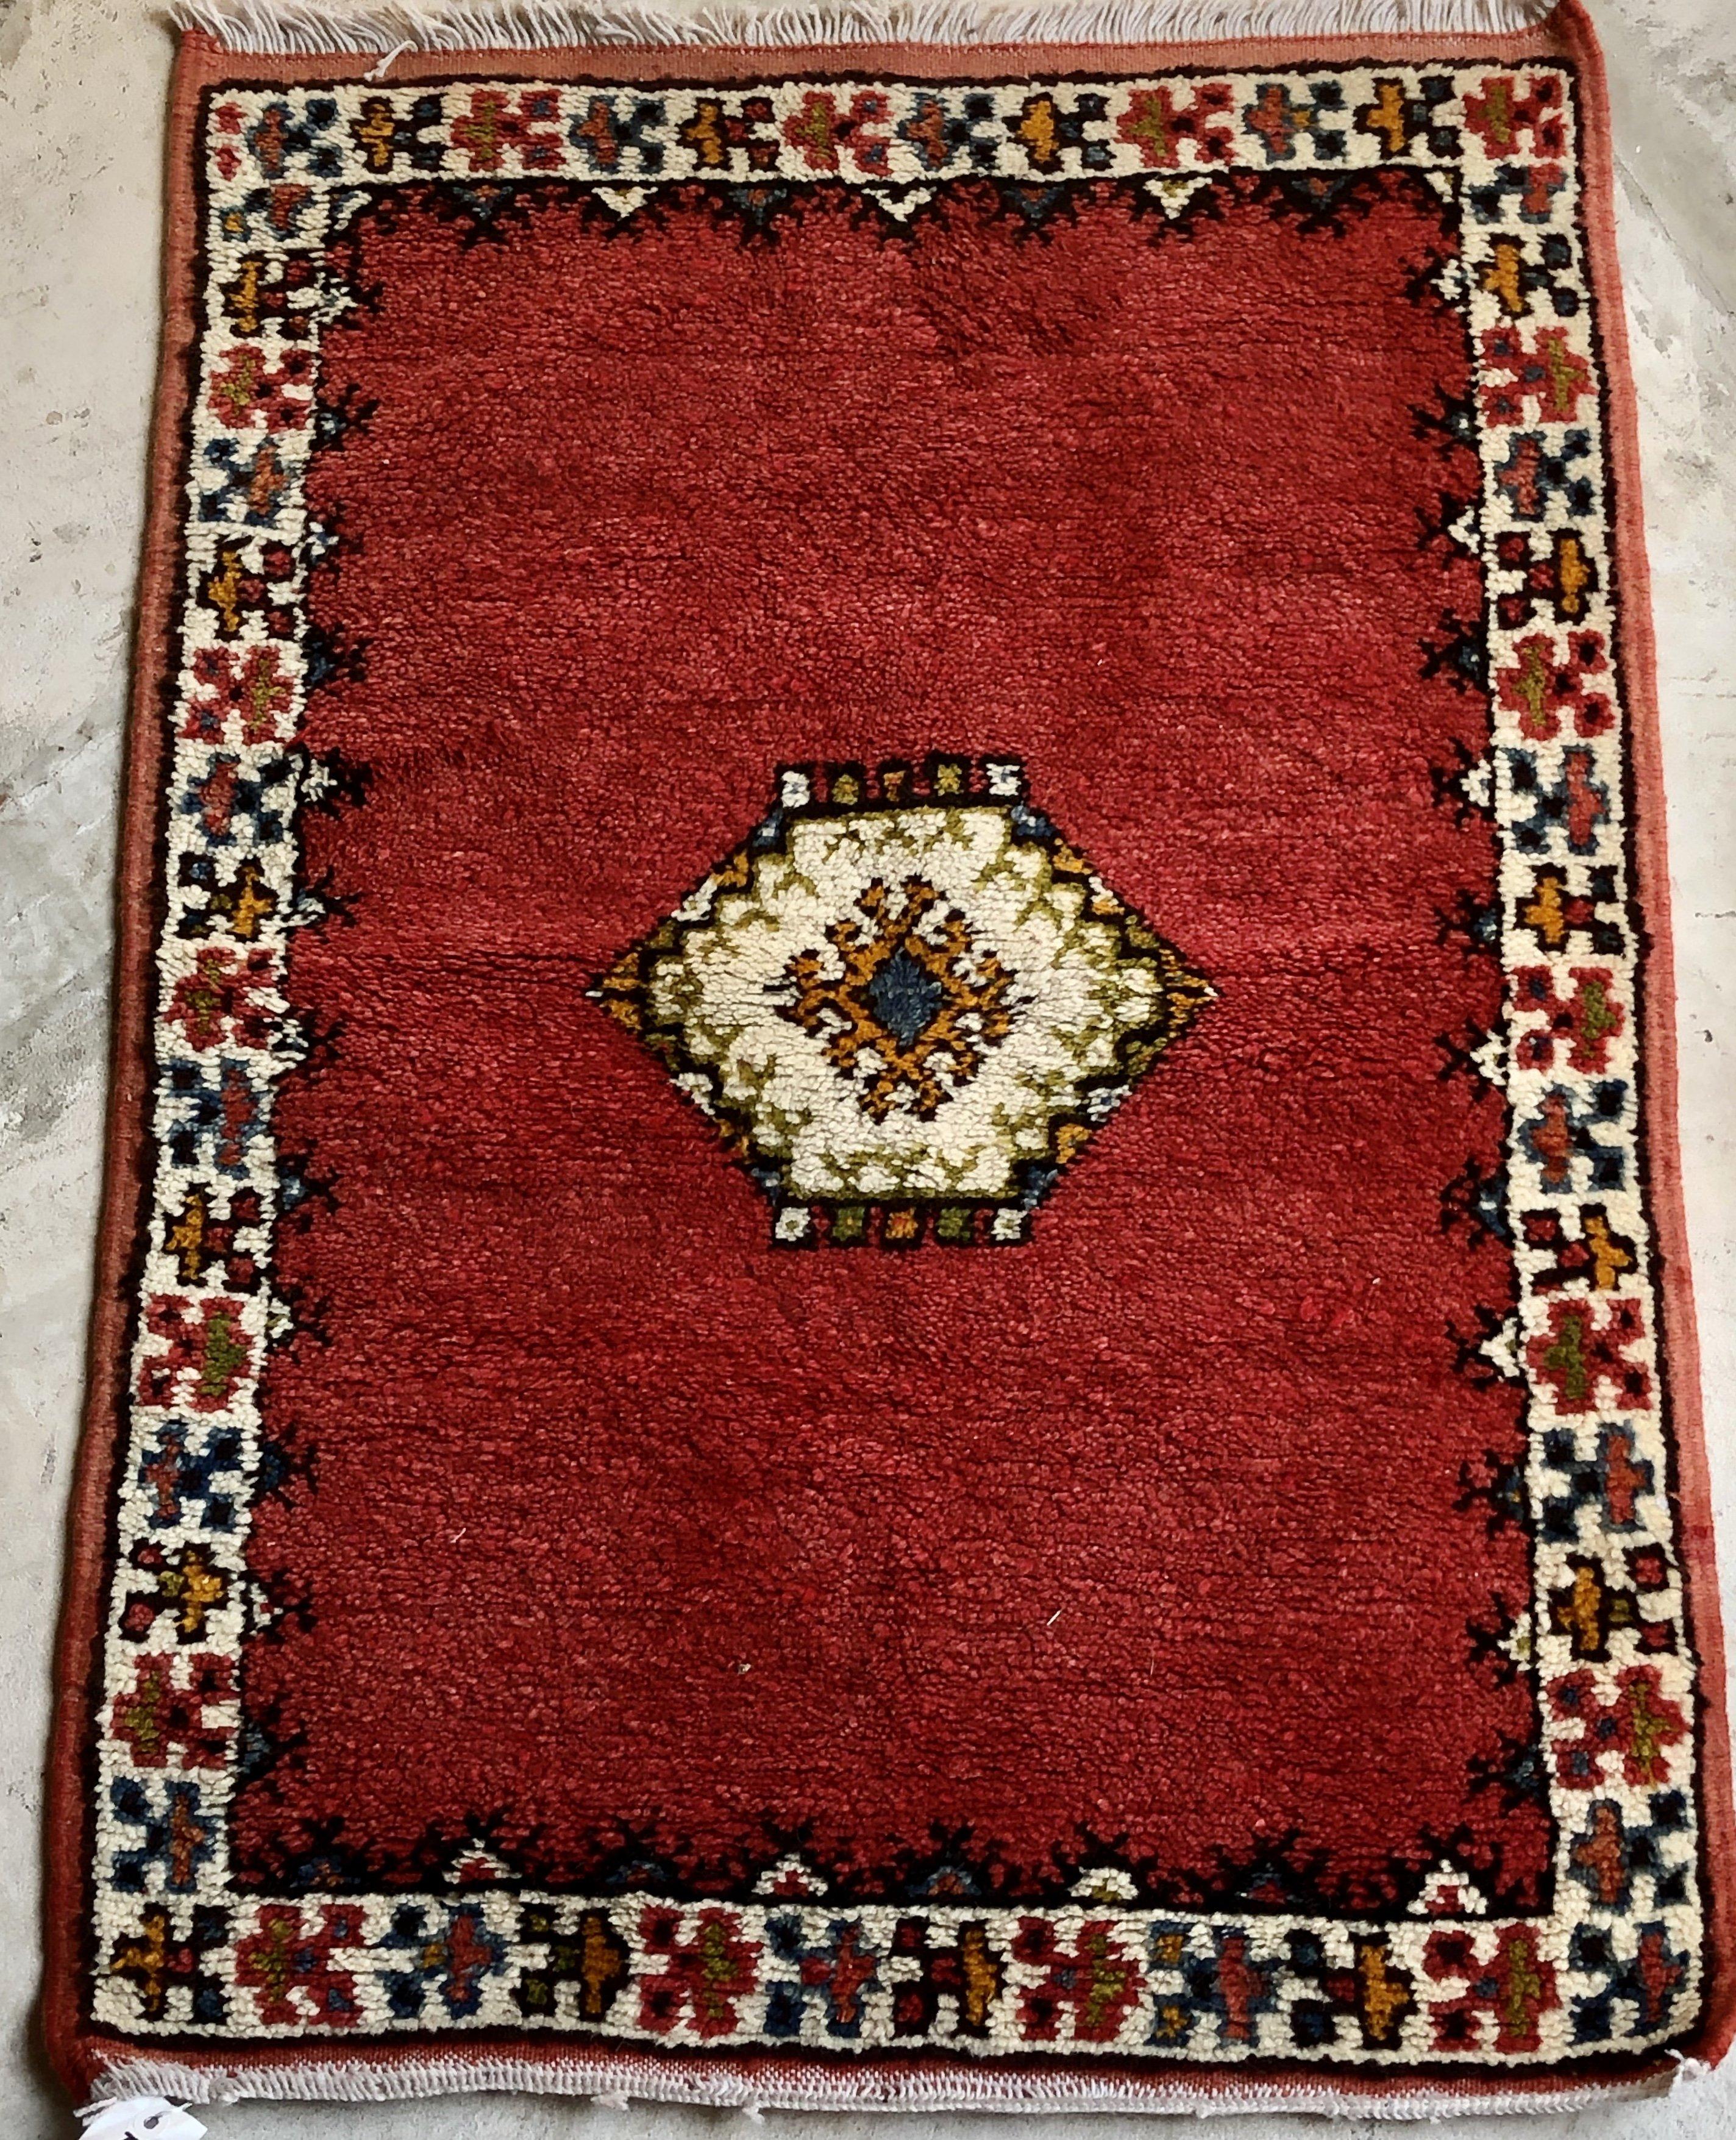 Indulge in the luxury of history with this vintage tribal Moroccan rug, handwoven with intricate geometrical designs and sheep wool. A diamond-shaped motif at the center adds a sophisticated touch to any room or space. Elevate your home with this